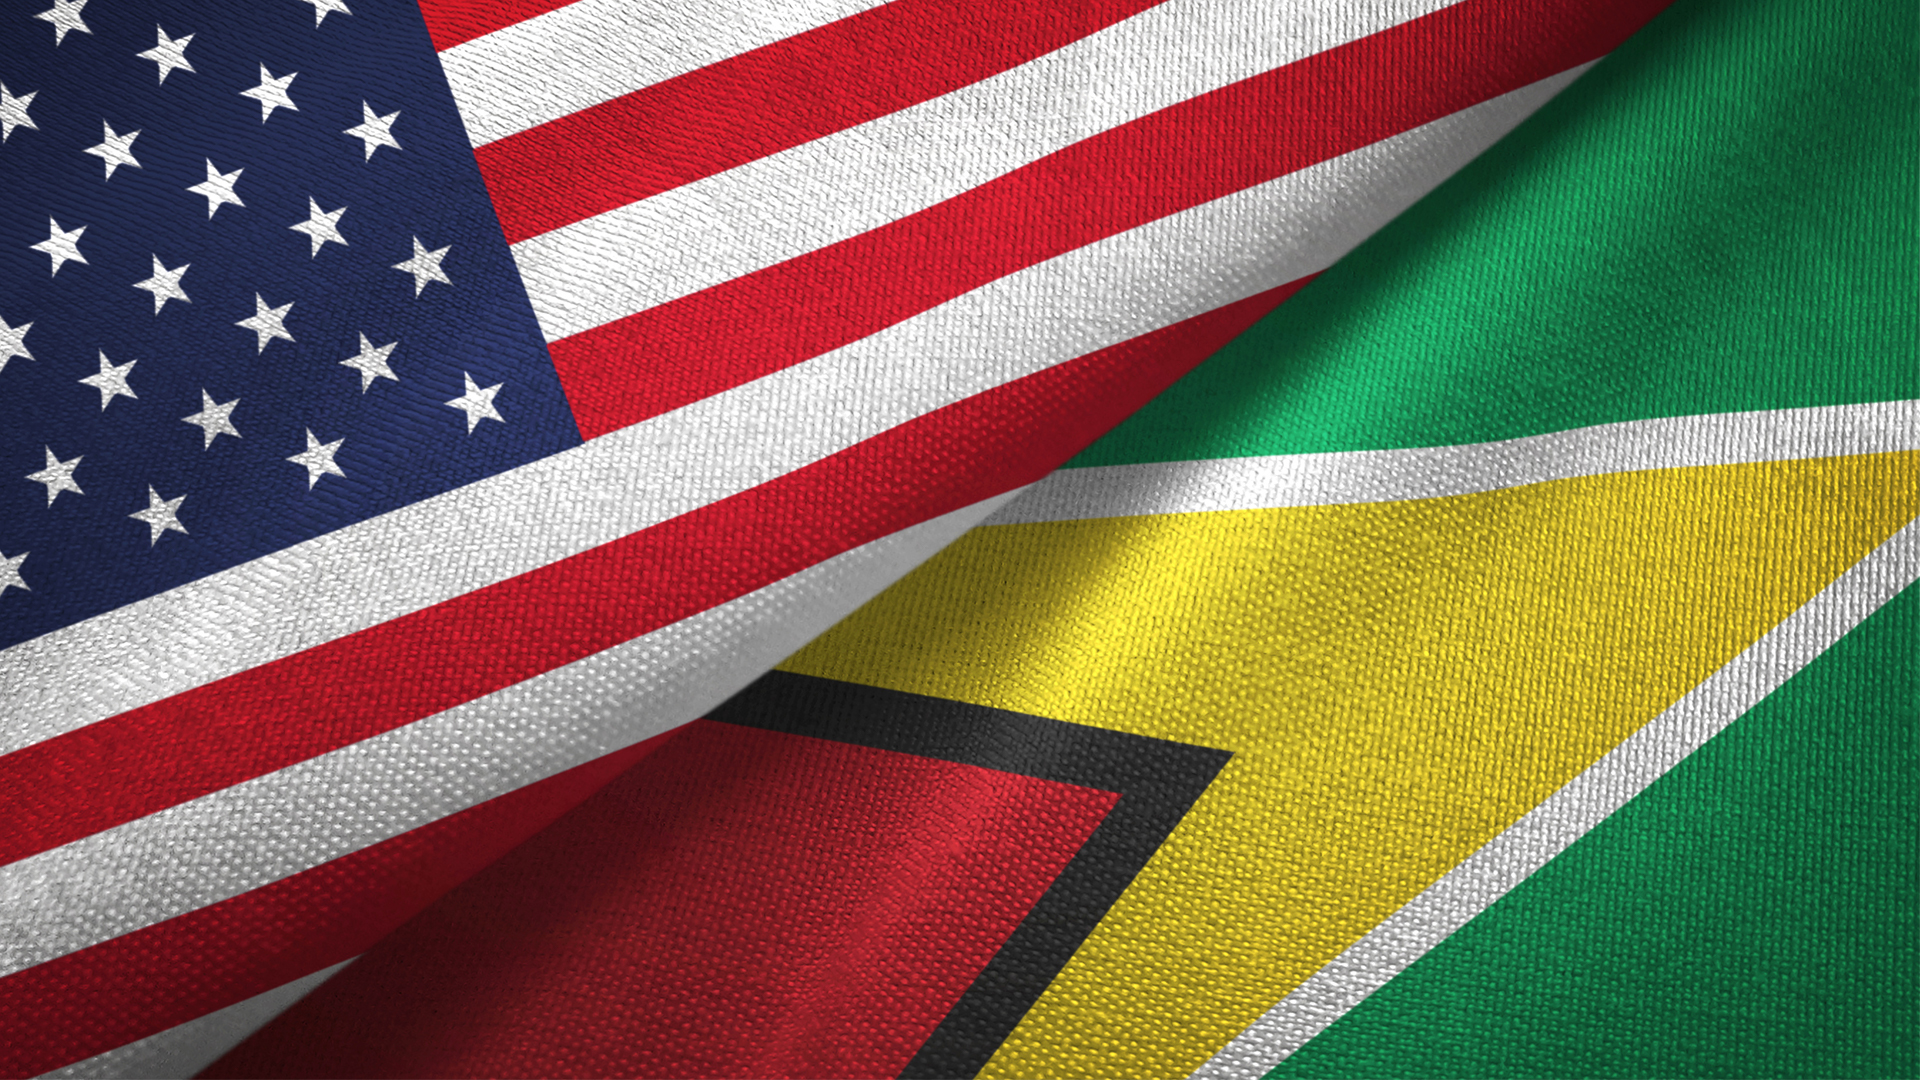 United States and Guyana two flags textile cloth, fabric texture Image